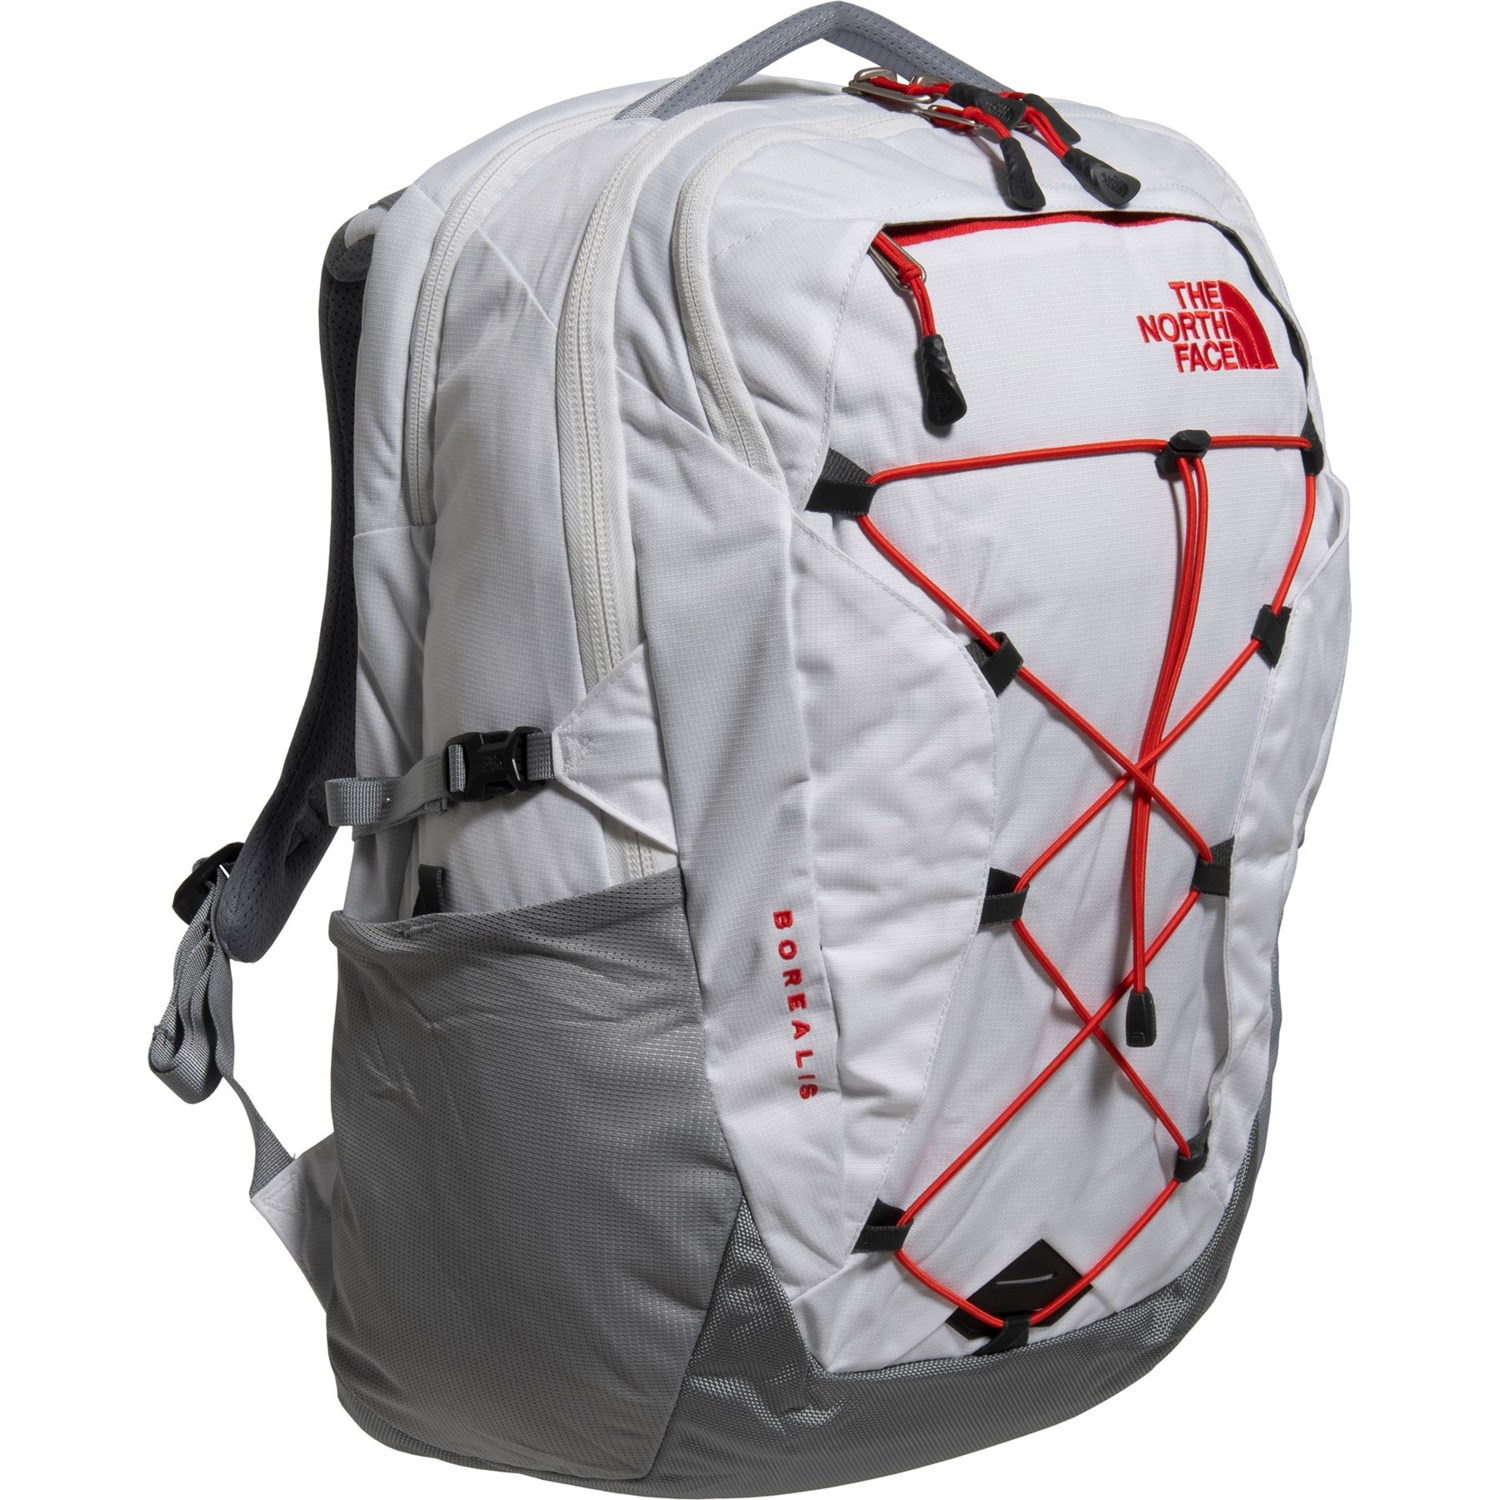 The North Face Borealis 27 L Backpack For Women